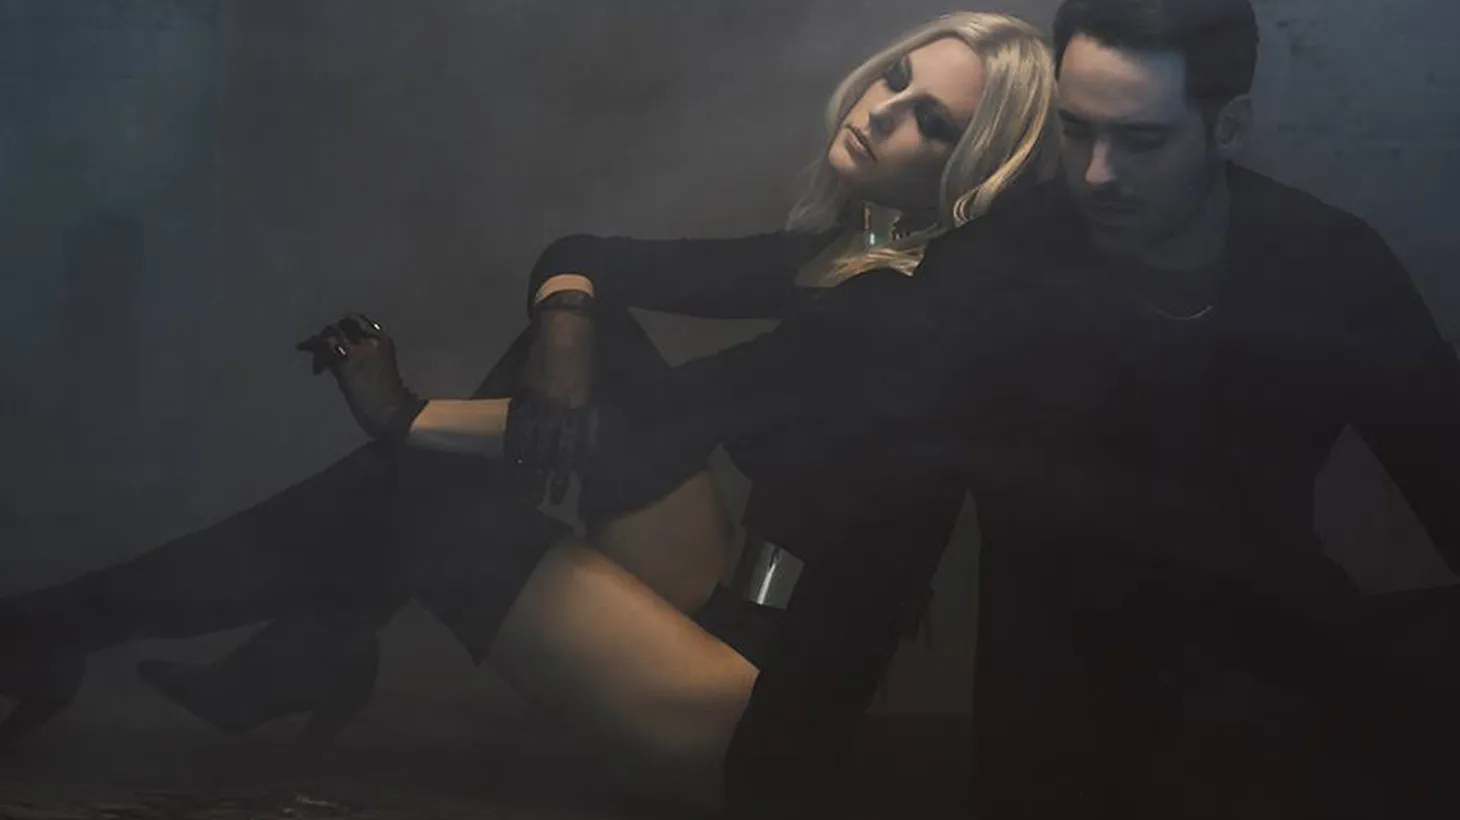 Electronic pop duo Phantogram were motivated by some tough times to craft a record about heartbreak that is dark but bombastic.